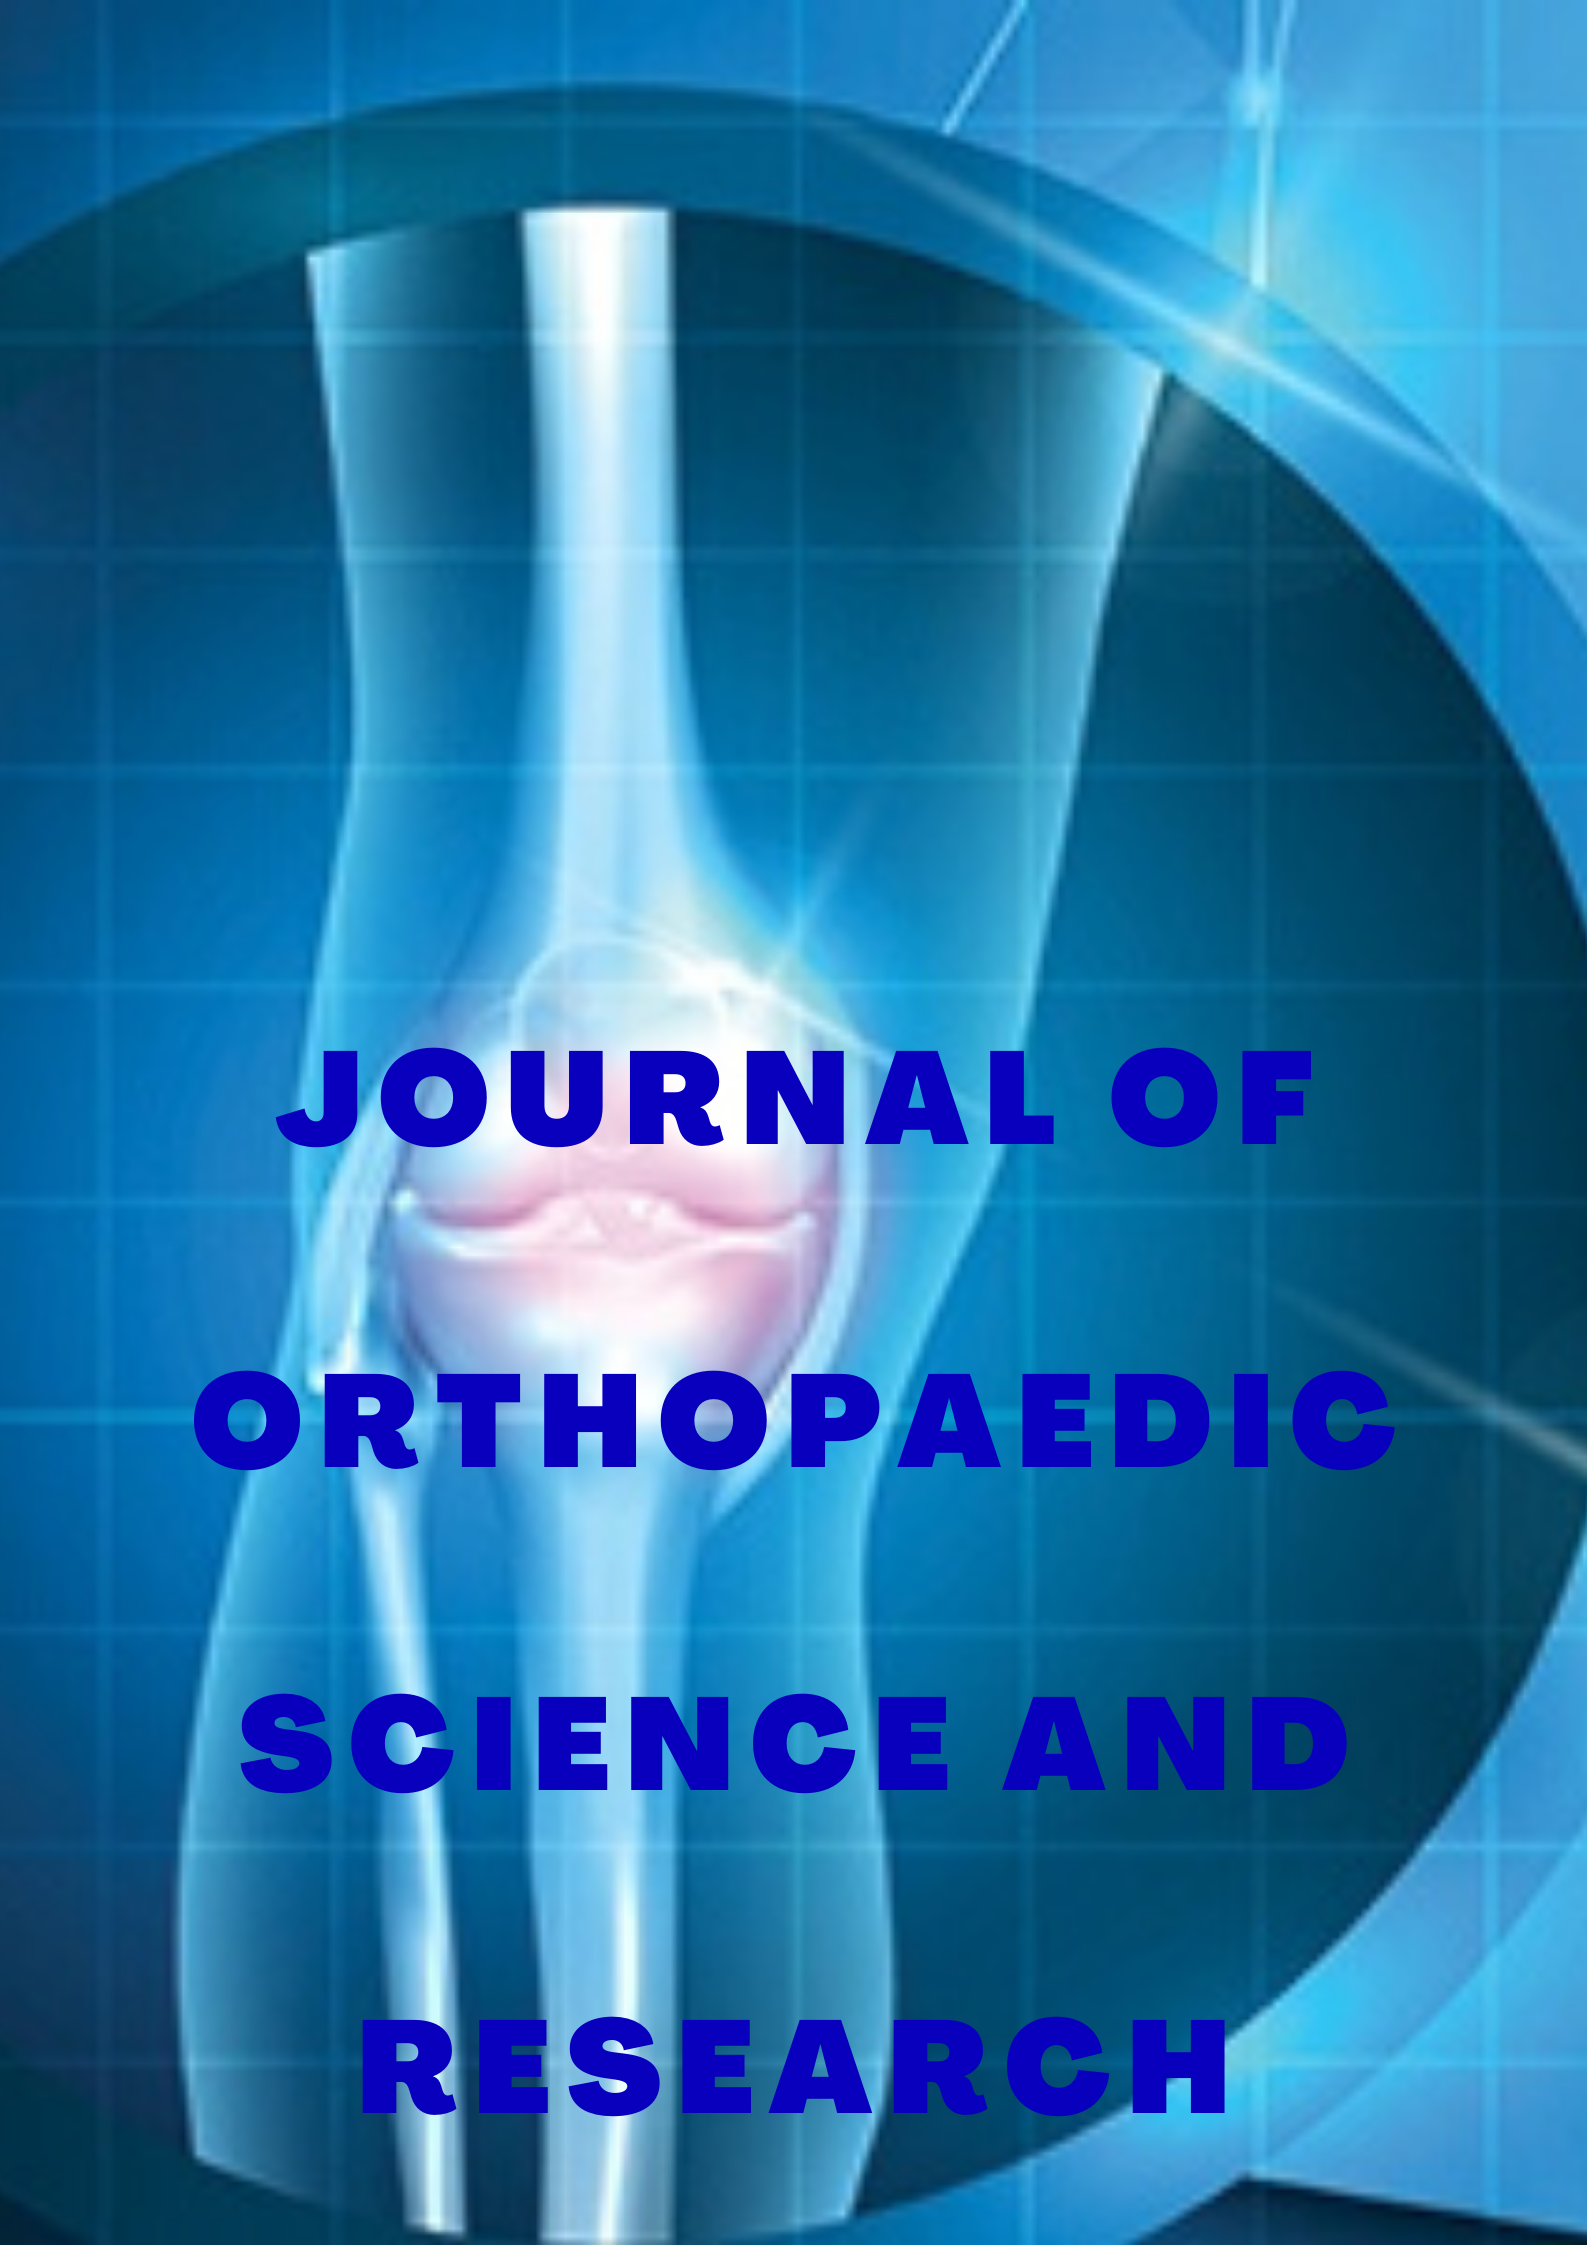 research topics in orthopedic surgery